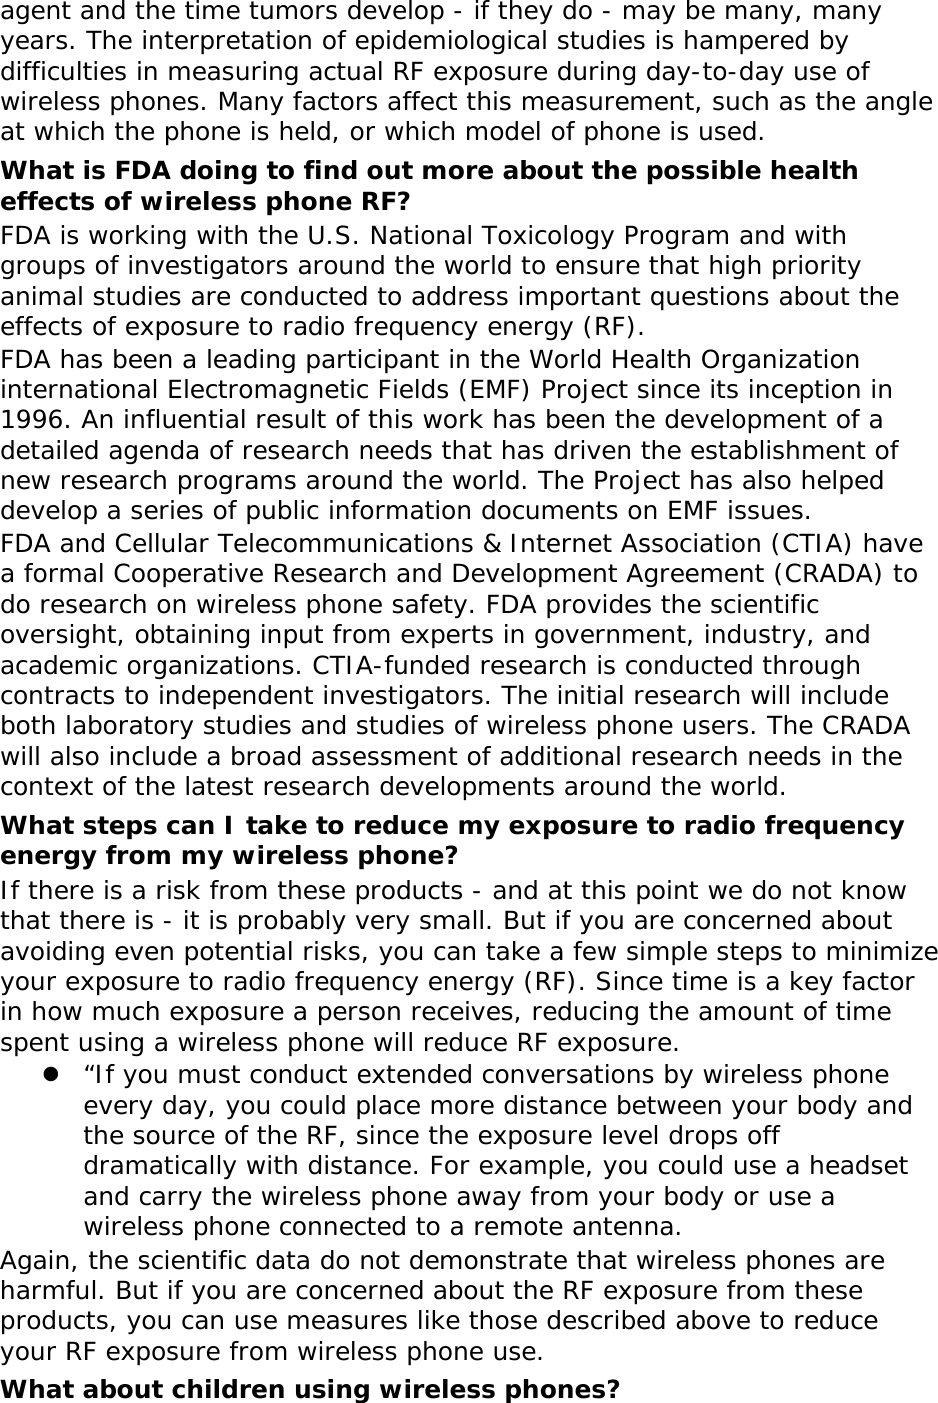 agent and the time tumors develop - if they do - may be many, many years. The interpretation of epidemiological studies is hampered by difficulties in measuring actual RF exposure during day-to-day use of wireless phones. Many factors affect this measurement, such as the angle at which the phone is held, or which model of phone is used. What is FDA doing to find out more about the possible health effects of wireless phone RF? FDA is working with the U.S. National Toxicology Program and with groups of investigators around the world to ensure that high priority animal studies are conducted to address important questions about the effects of exposure to radio frequency energy (RF). FDA has been a leading participant in the World Health Organization international Electromagnetic Fields (EMF) Project since its inception in 1996. An influential result of this work has been the development of a detailed agenda of research needs that has driven the establishment of new research programs around the world. The Project has also helped develop a series of public information documents on EMF issues. FDA and Cellular Telecommunications &amp; Internet Association (CTIA) have a formal Cooperative Research and Development Agreement (CRADA) to do research on wireless phone safety. FDA provides the scientific oversight, obtaining input from experts in government, industry, and academic organizations. CTIA-funded research is conducted through contracts to independent investigators. The initial research will include both laboratory studies and studies of wireless phone users. The CRADA will also include a broad assessment of additional research needs in the context of the latest research developments around the world. What steps can I take to reduce my exposure to radio frequency energy from my wireless phone? If there is a risk from these products - and at this point we do not know that there is - it is probably very small. But if you are concerned about avoiding even potential risks, you can take a few simple steps to minimize your exposure to radio frequency energy (RF). Since time is a key factor in how much exposure a person receives, reducing the amount of time spent using a wireless phone will reduce RF exposure.  “If you must conduct extended conversations by wireless phone every day, you could place more distance between your body and the source of the RF, since the exposure level drops off dramatically with distance. For example, you could use a headset and carry the wireless phone away from your body or use a wireless phone connected to a remote antenna. Again, the scientific data do not demonstrate that wireless phones are harmful. But if you are concerned about the RF exposure from these products, you can use measures like those described above to reduce your RF exposure from wireless phone use. What about children using wireless phones? 